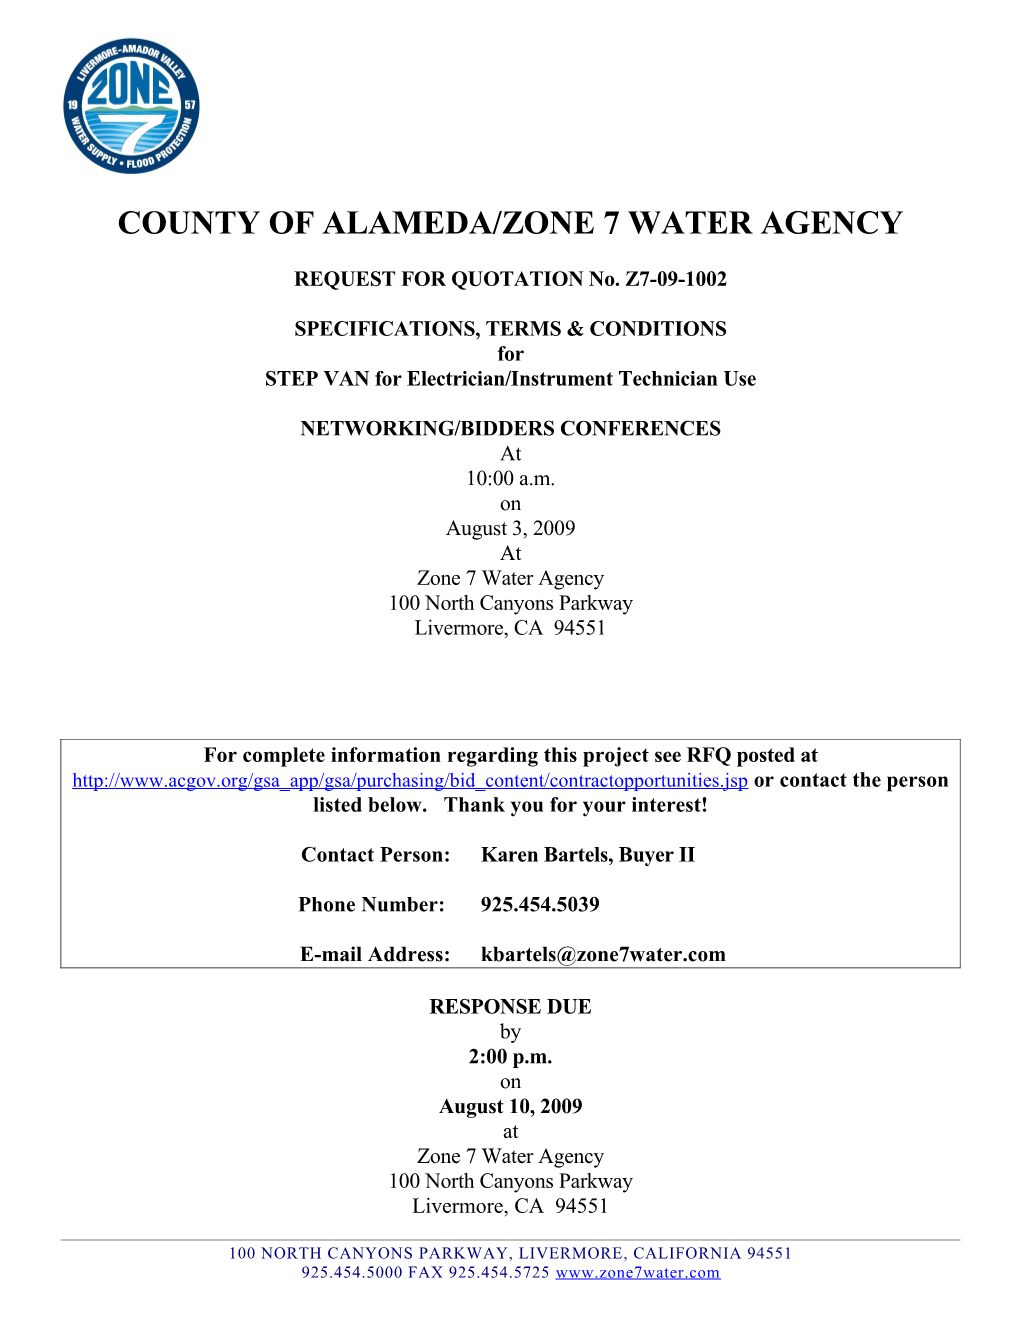 County of Alameda/Zone 7 Water Agency